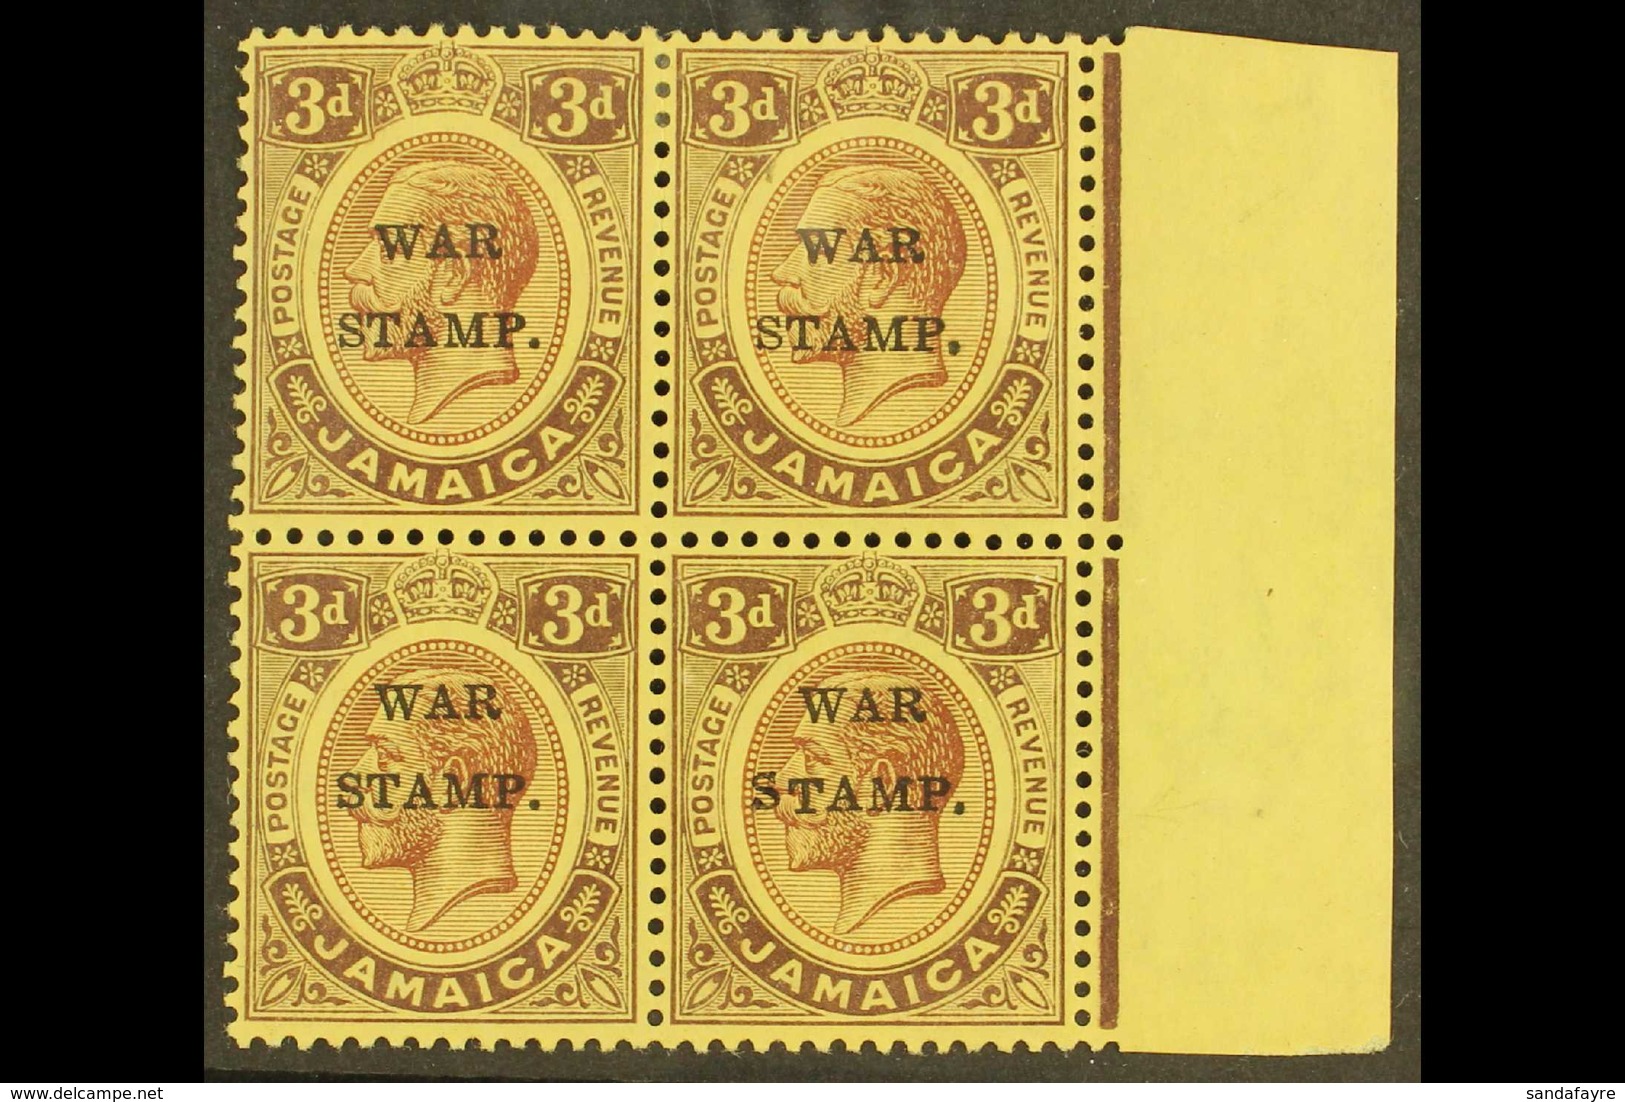 1916 3d Purple On Lemon Ovptd "War Stamp", Marginal Mint Block Of 4 One Showing Variety "S Inserted By Hand", SG 72/72c. - Jamaica (...-1961)